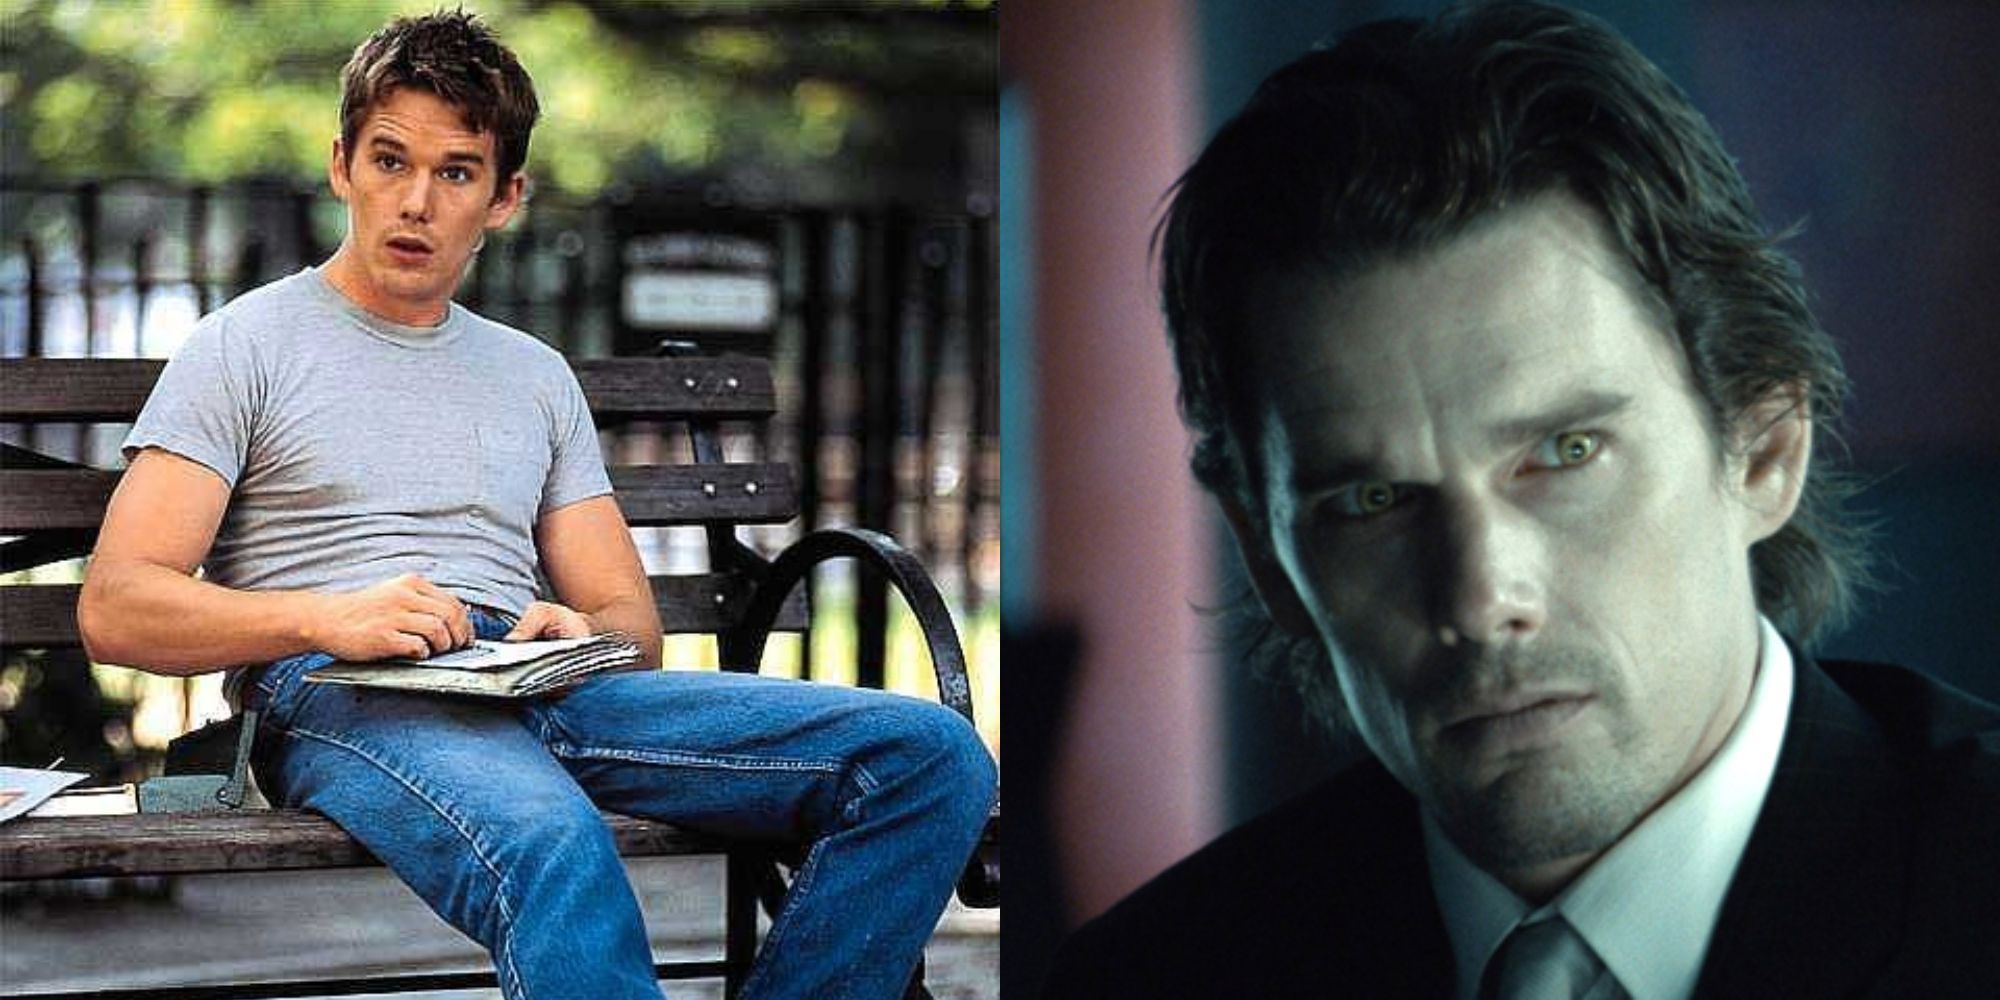 Split image showing Ethan Hawke in Great Expectations and Daybreakers.